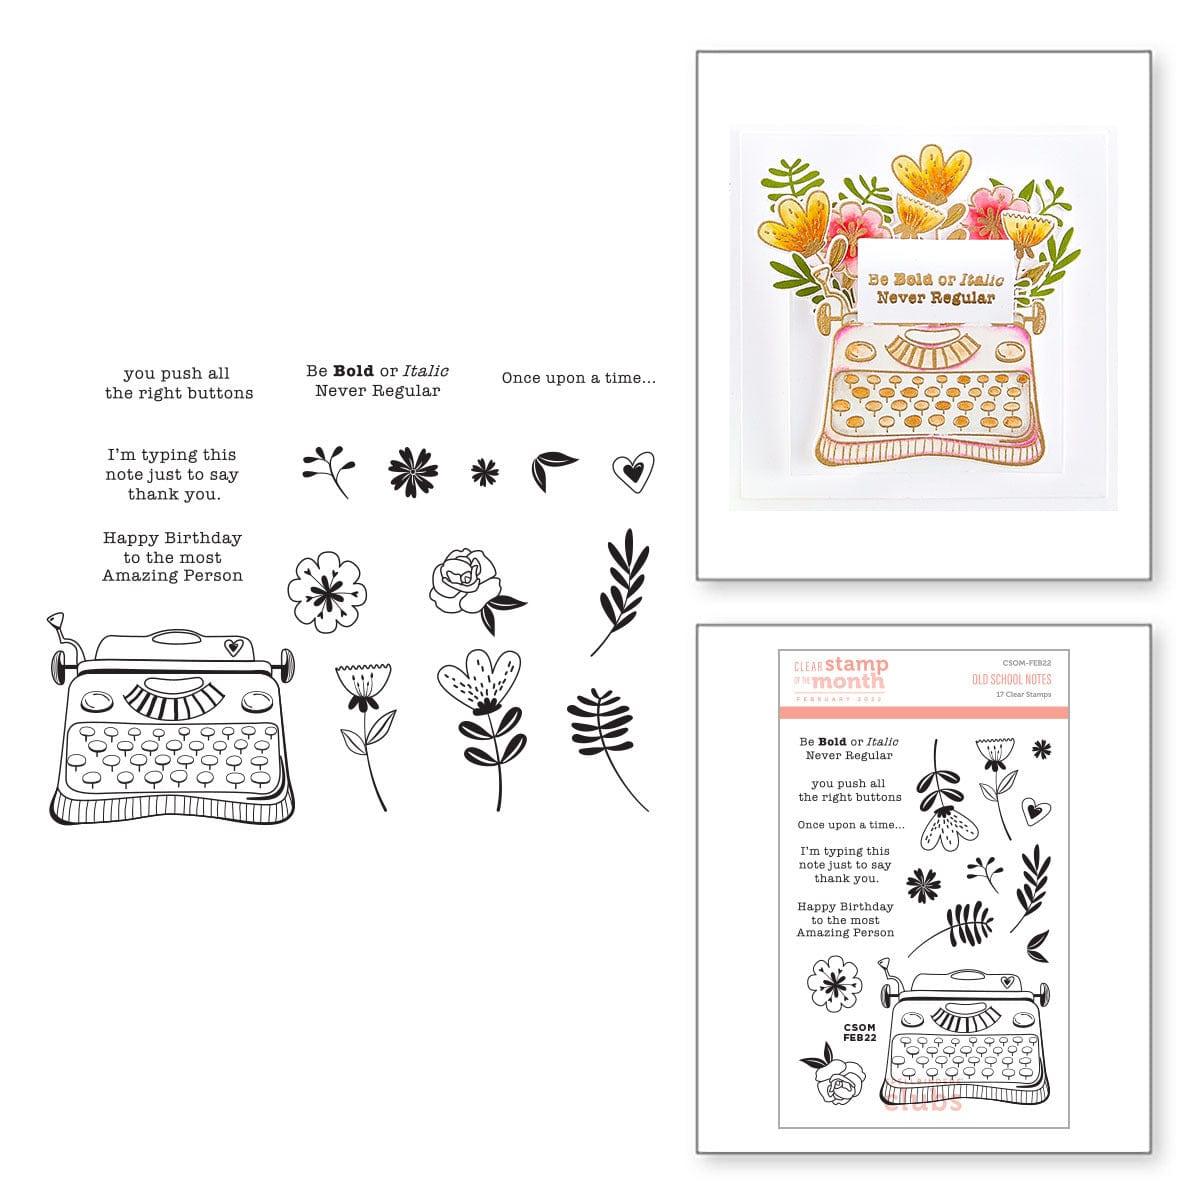 Clear Stamp of the Month Club